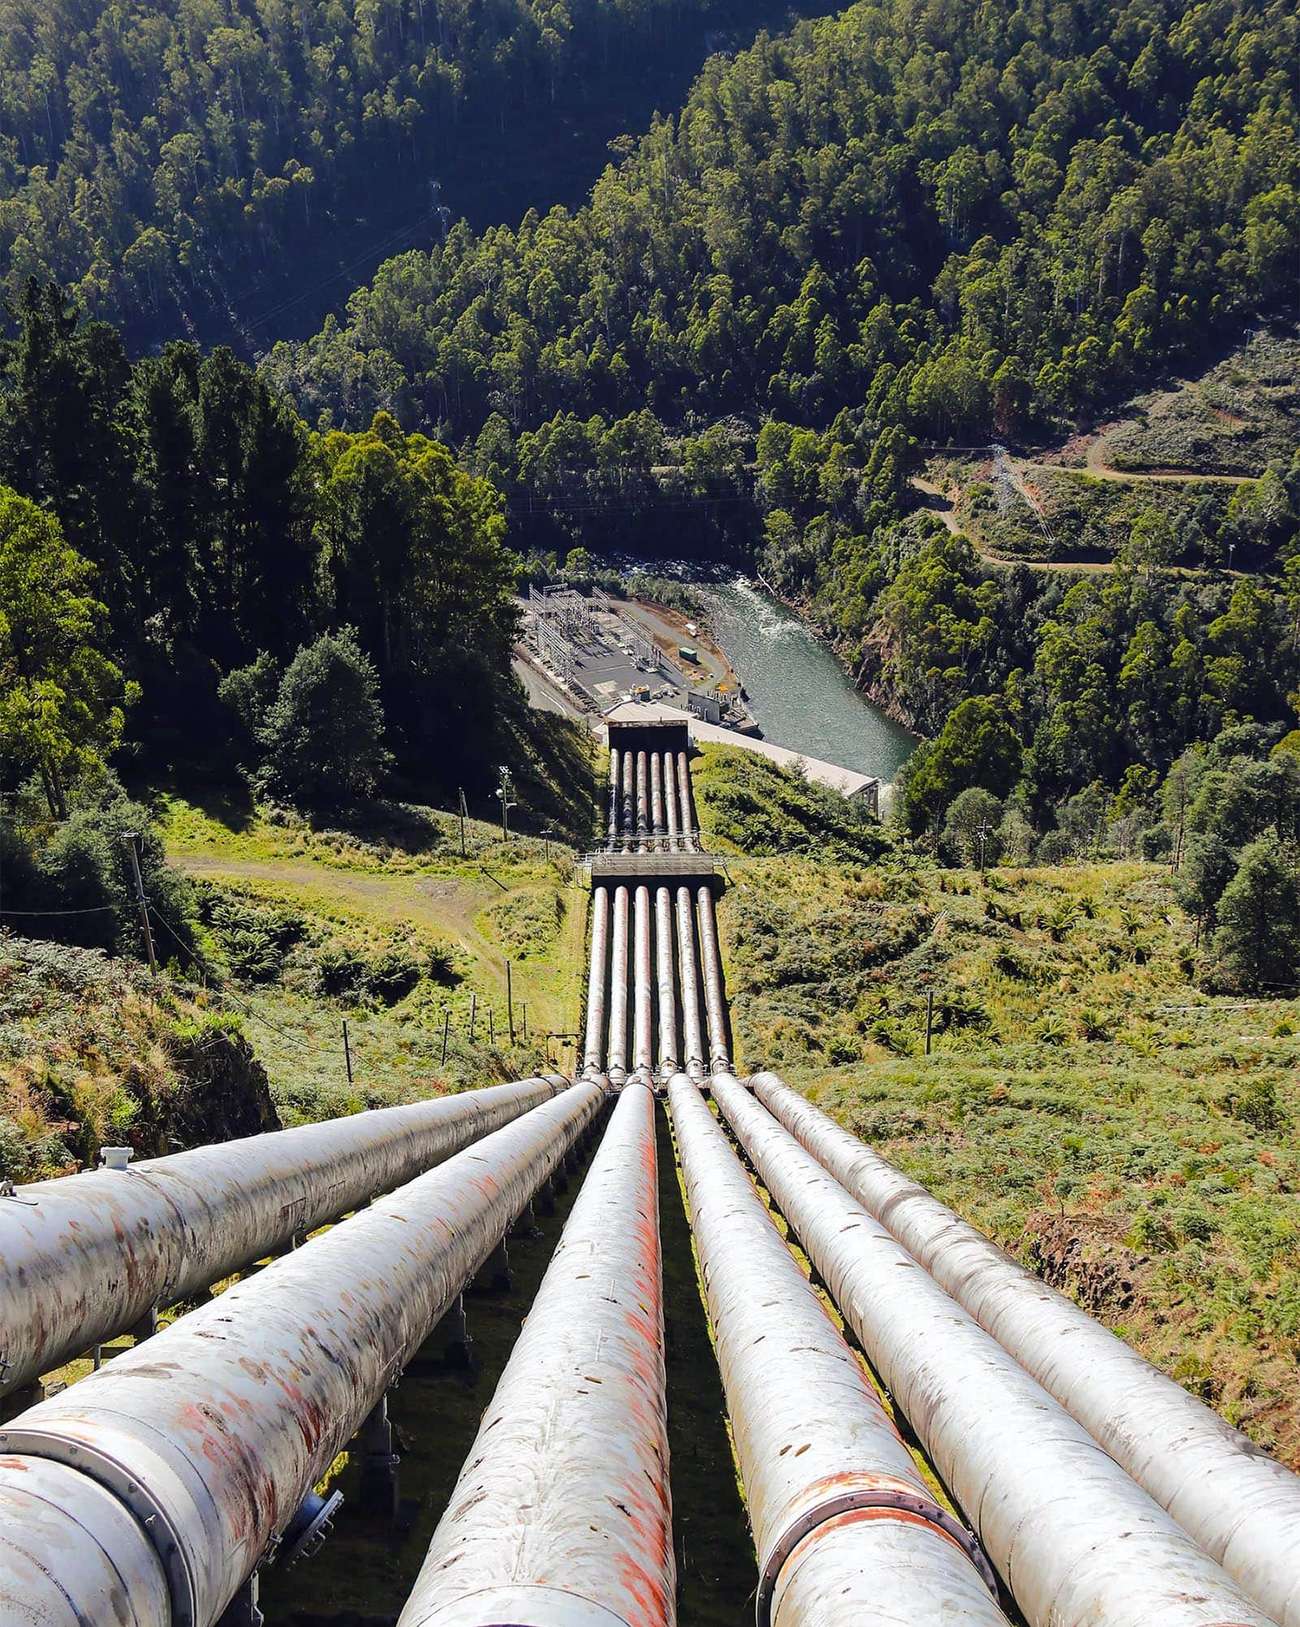 Image of Geothermal pipes heading down a hillside towards a forest